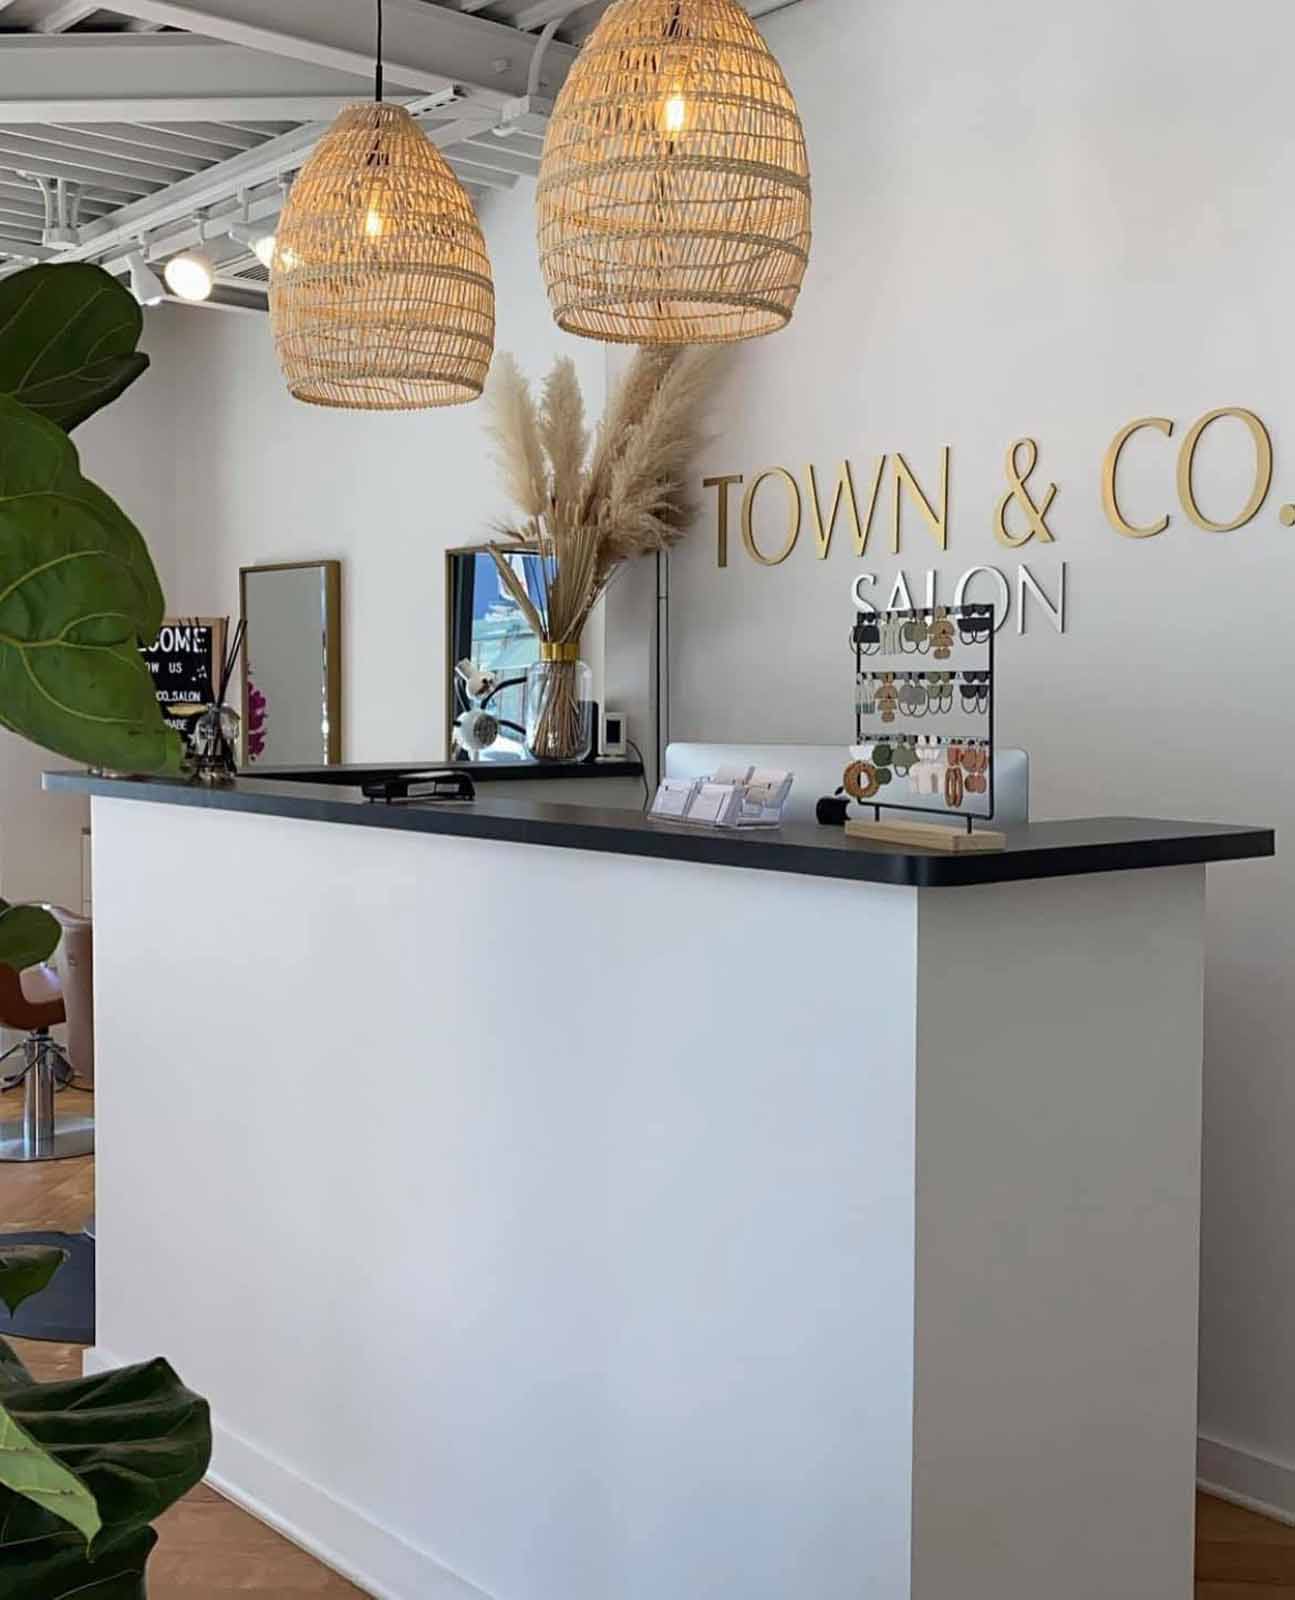 Town &amp; Co. Salon Adds Stylist For Men Only